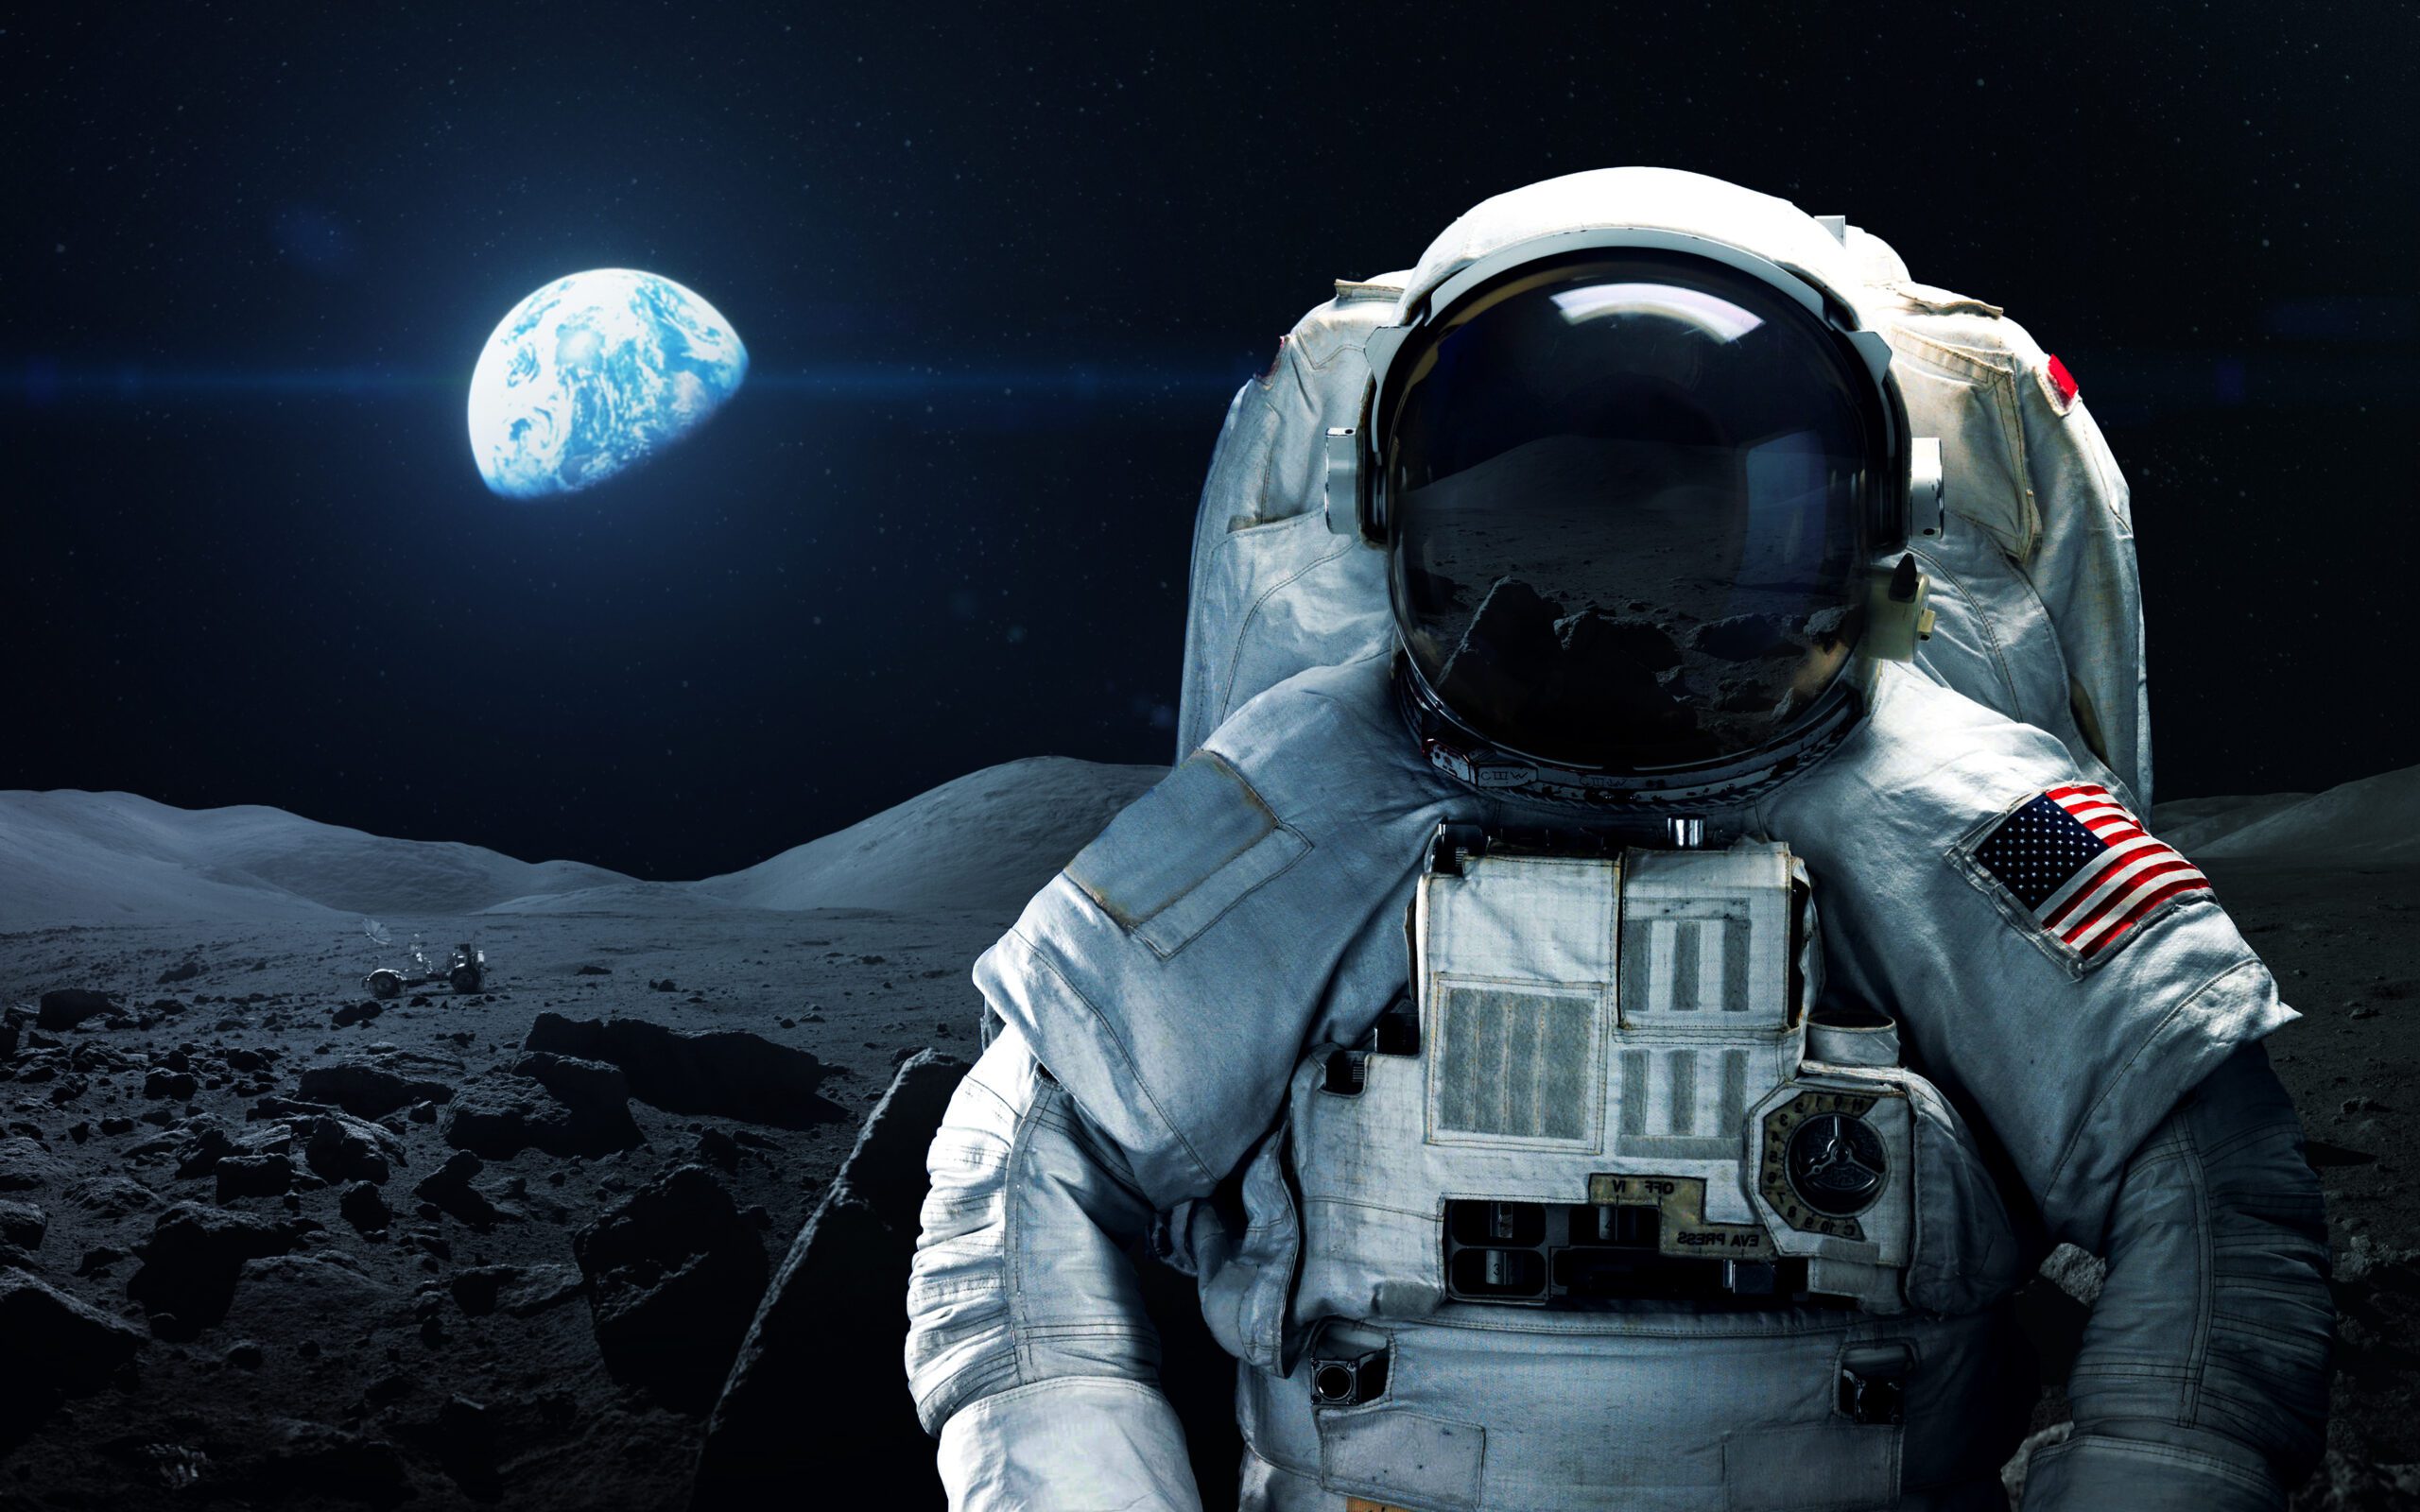 Featured image for “Moon Landing Day: Teaching Astronomy and Cultivating a Love for the Stars”